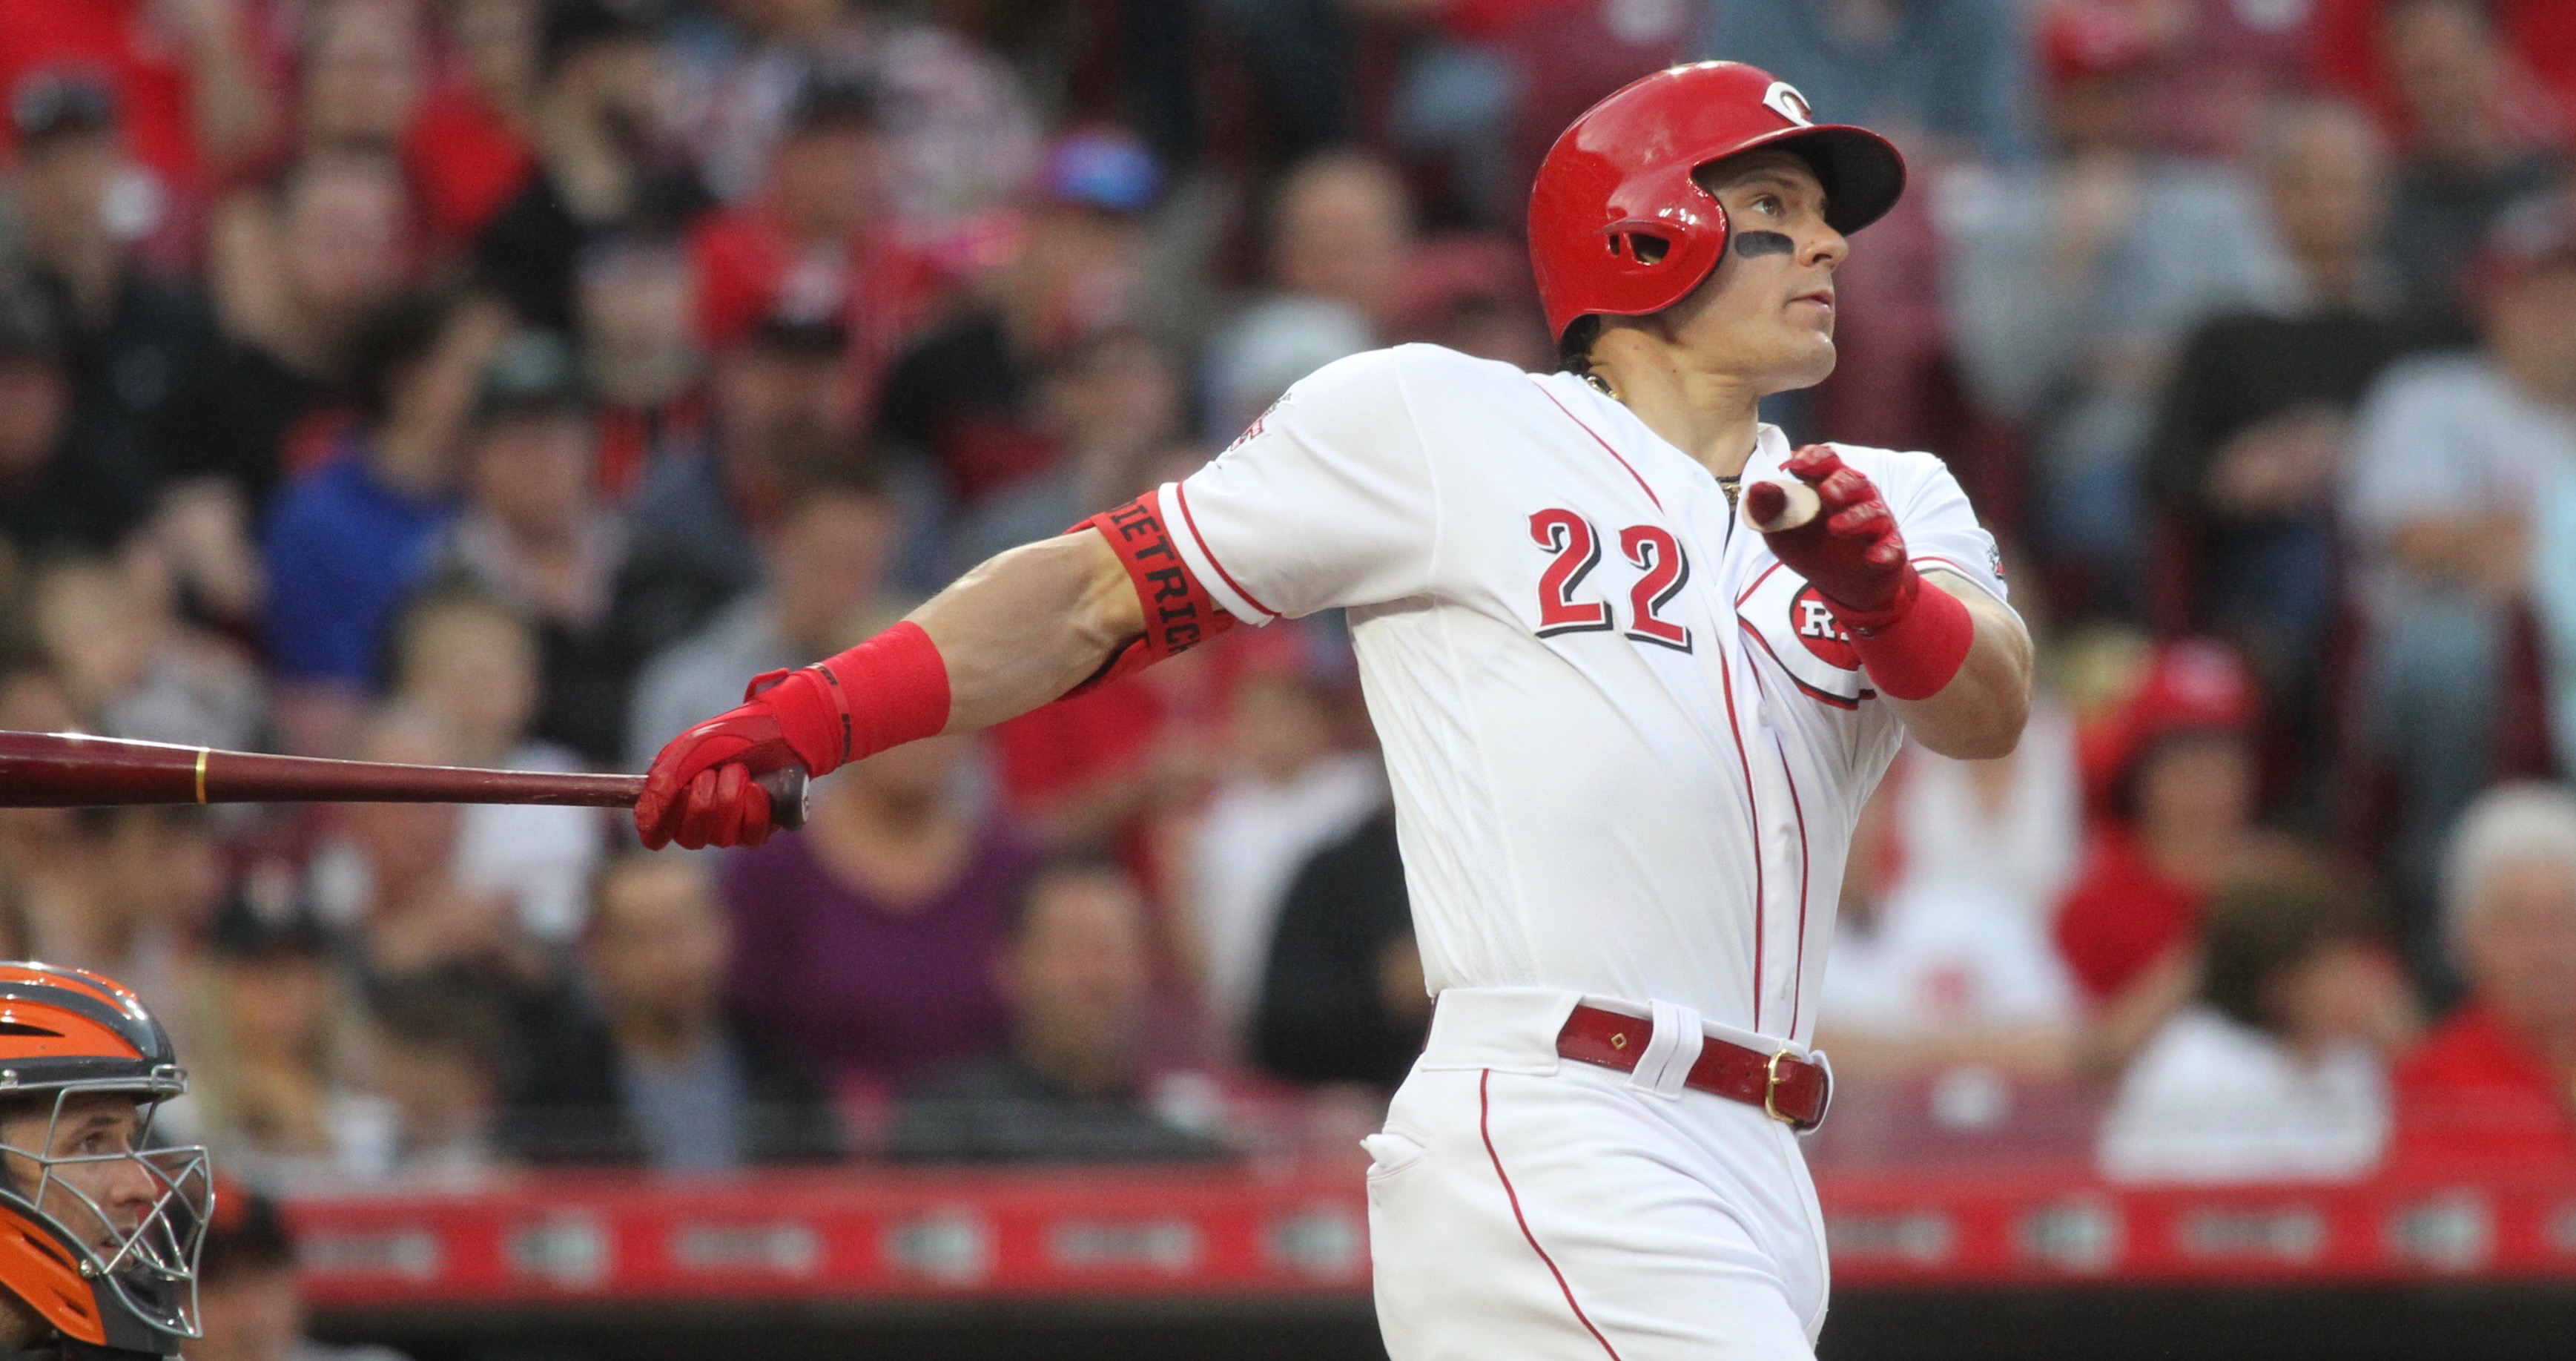 What is Derek Dietrich's path to the Opening Day roster